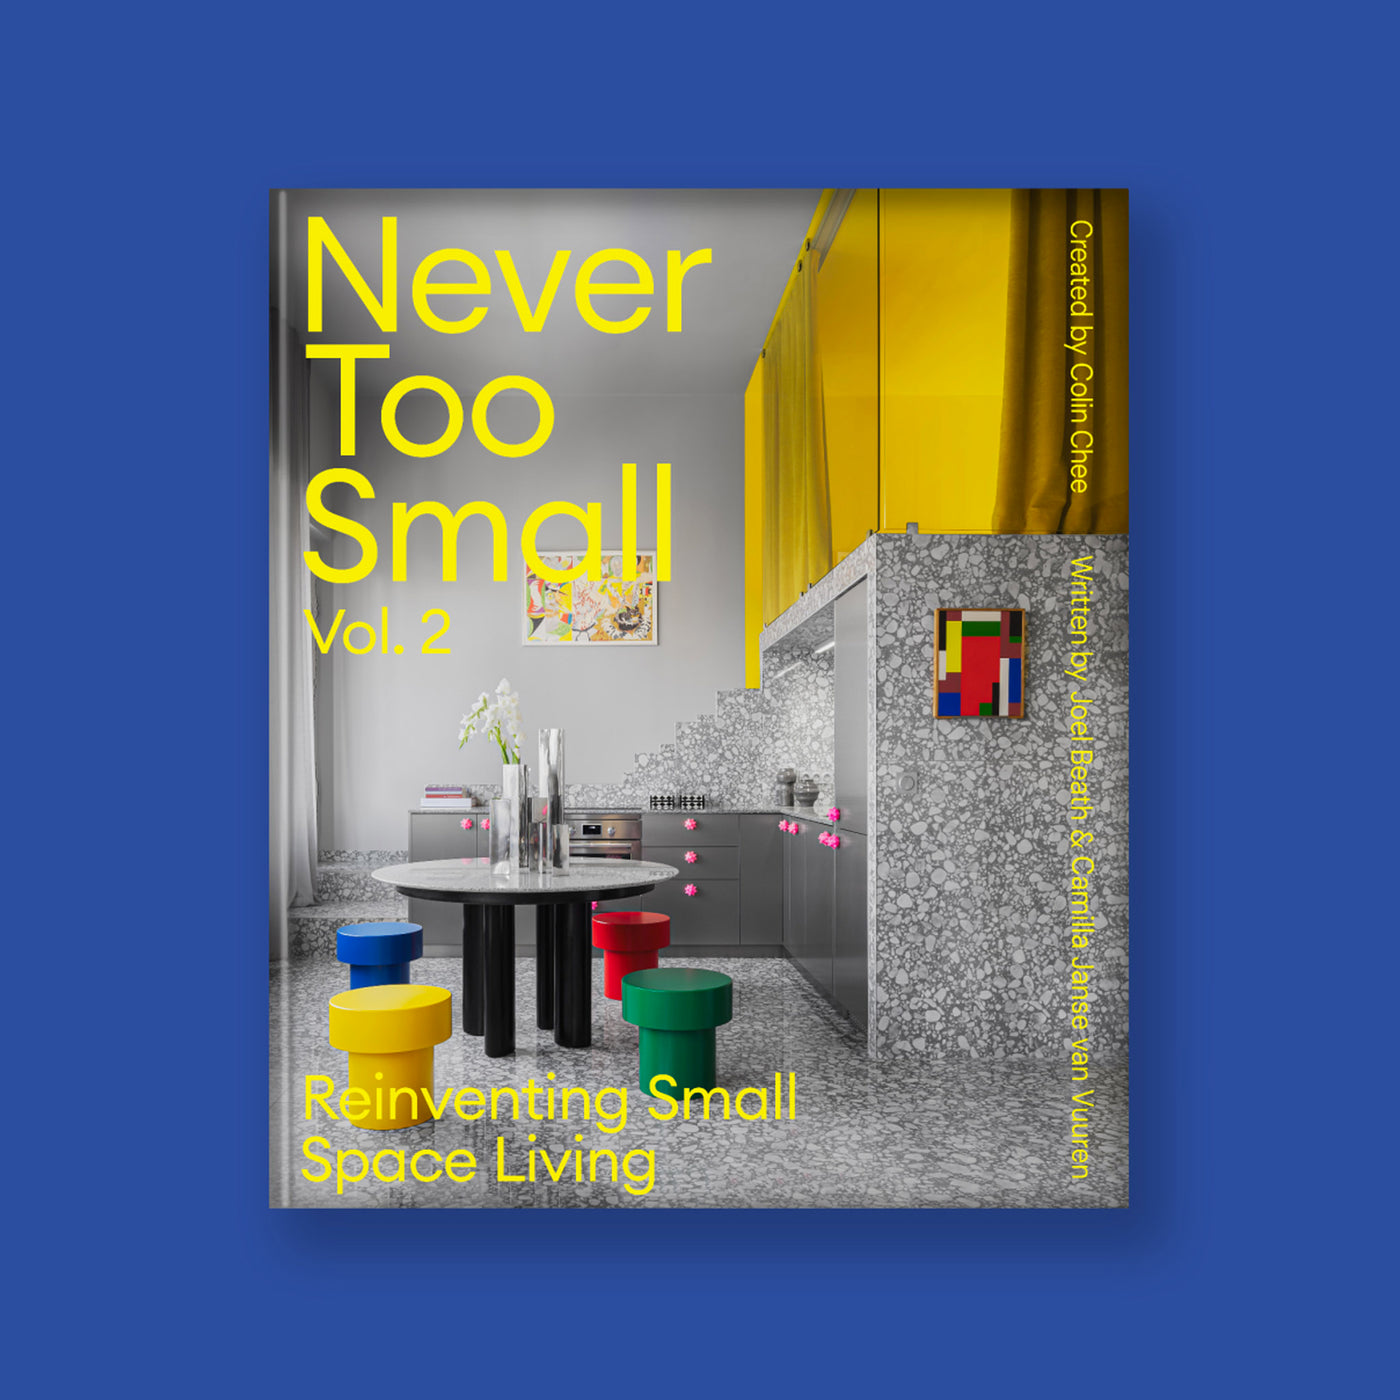 Never Too Small Vol.2: Reinventing Small Space Living